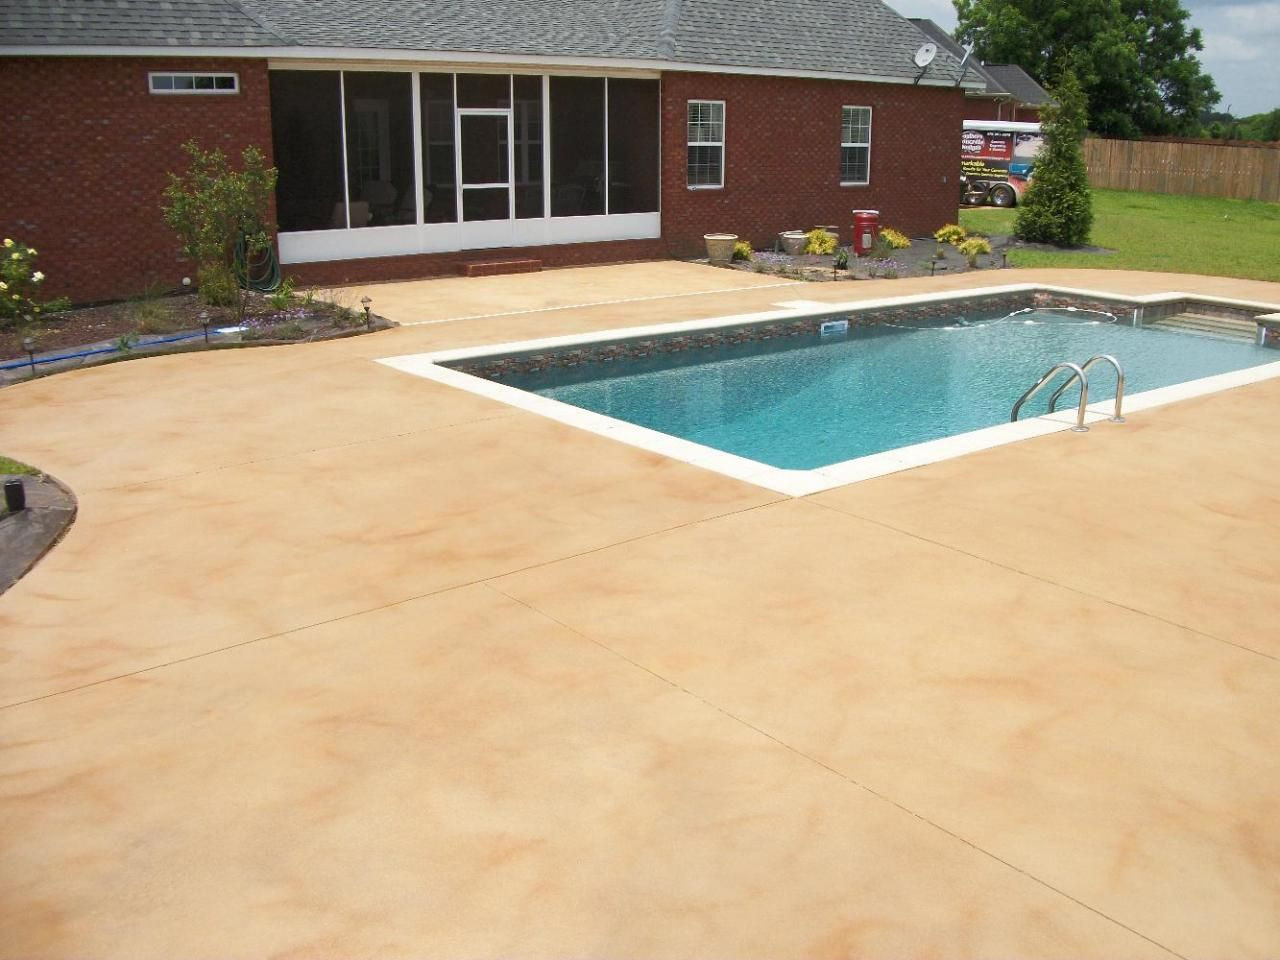 Concrete Pool Deck Painting
 best colors for a cement pool deck Google Search in 2019